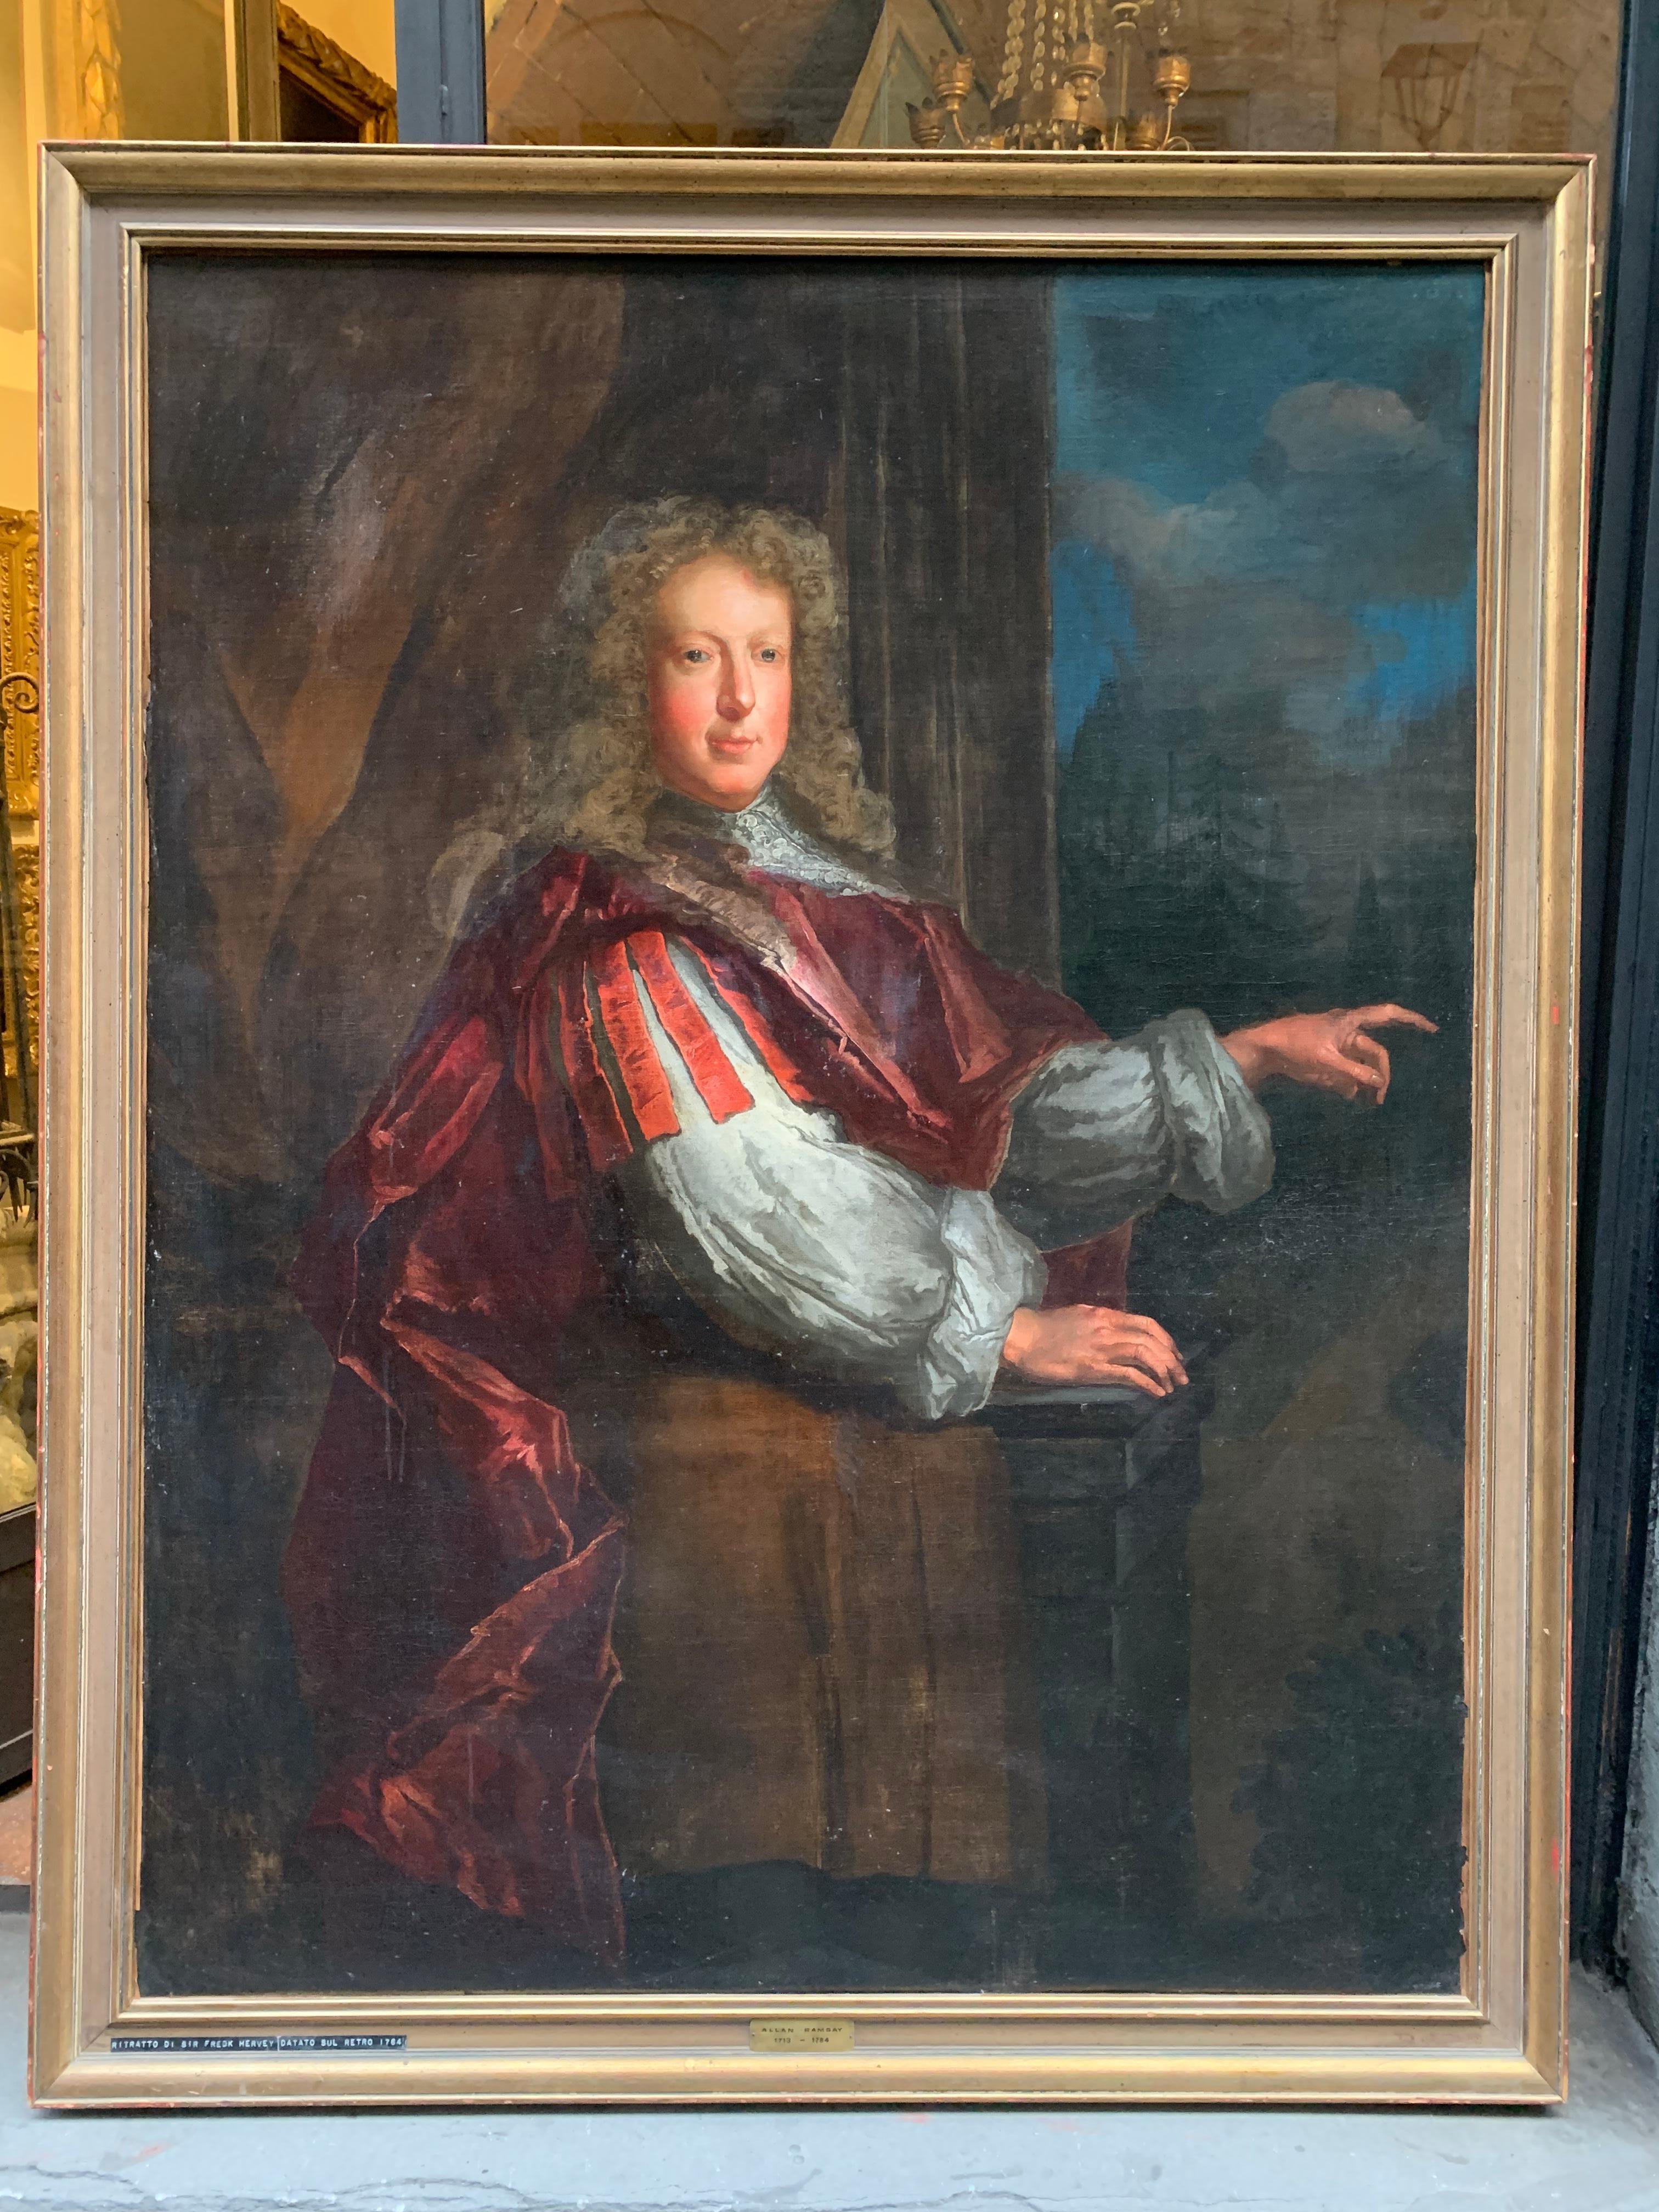 Portrait of John Hervey, 1st Earl of Bristol (1665-1751).

Early 18th-century near-life-size portrait of a noble man richly dressed in a long wig. 

Circle of the German-British court painter Gottfried Kneller (Lübeck, 1646-1723, London).